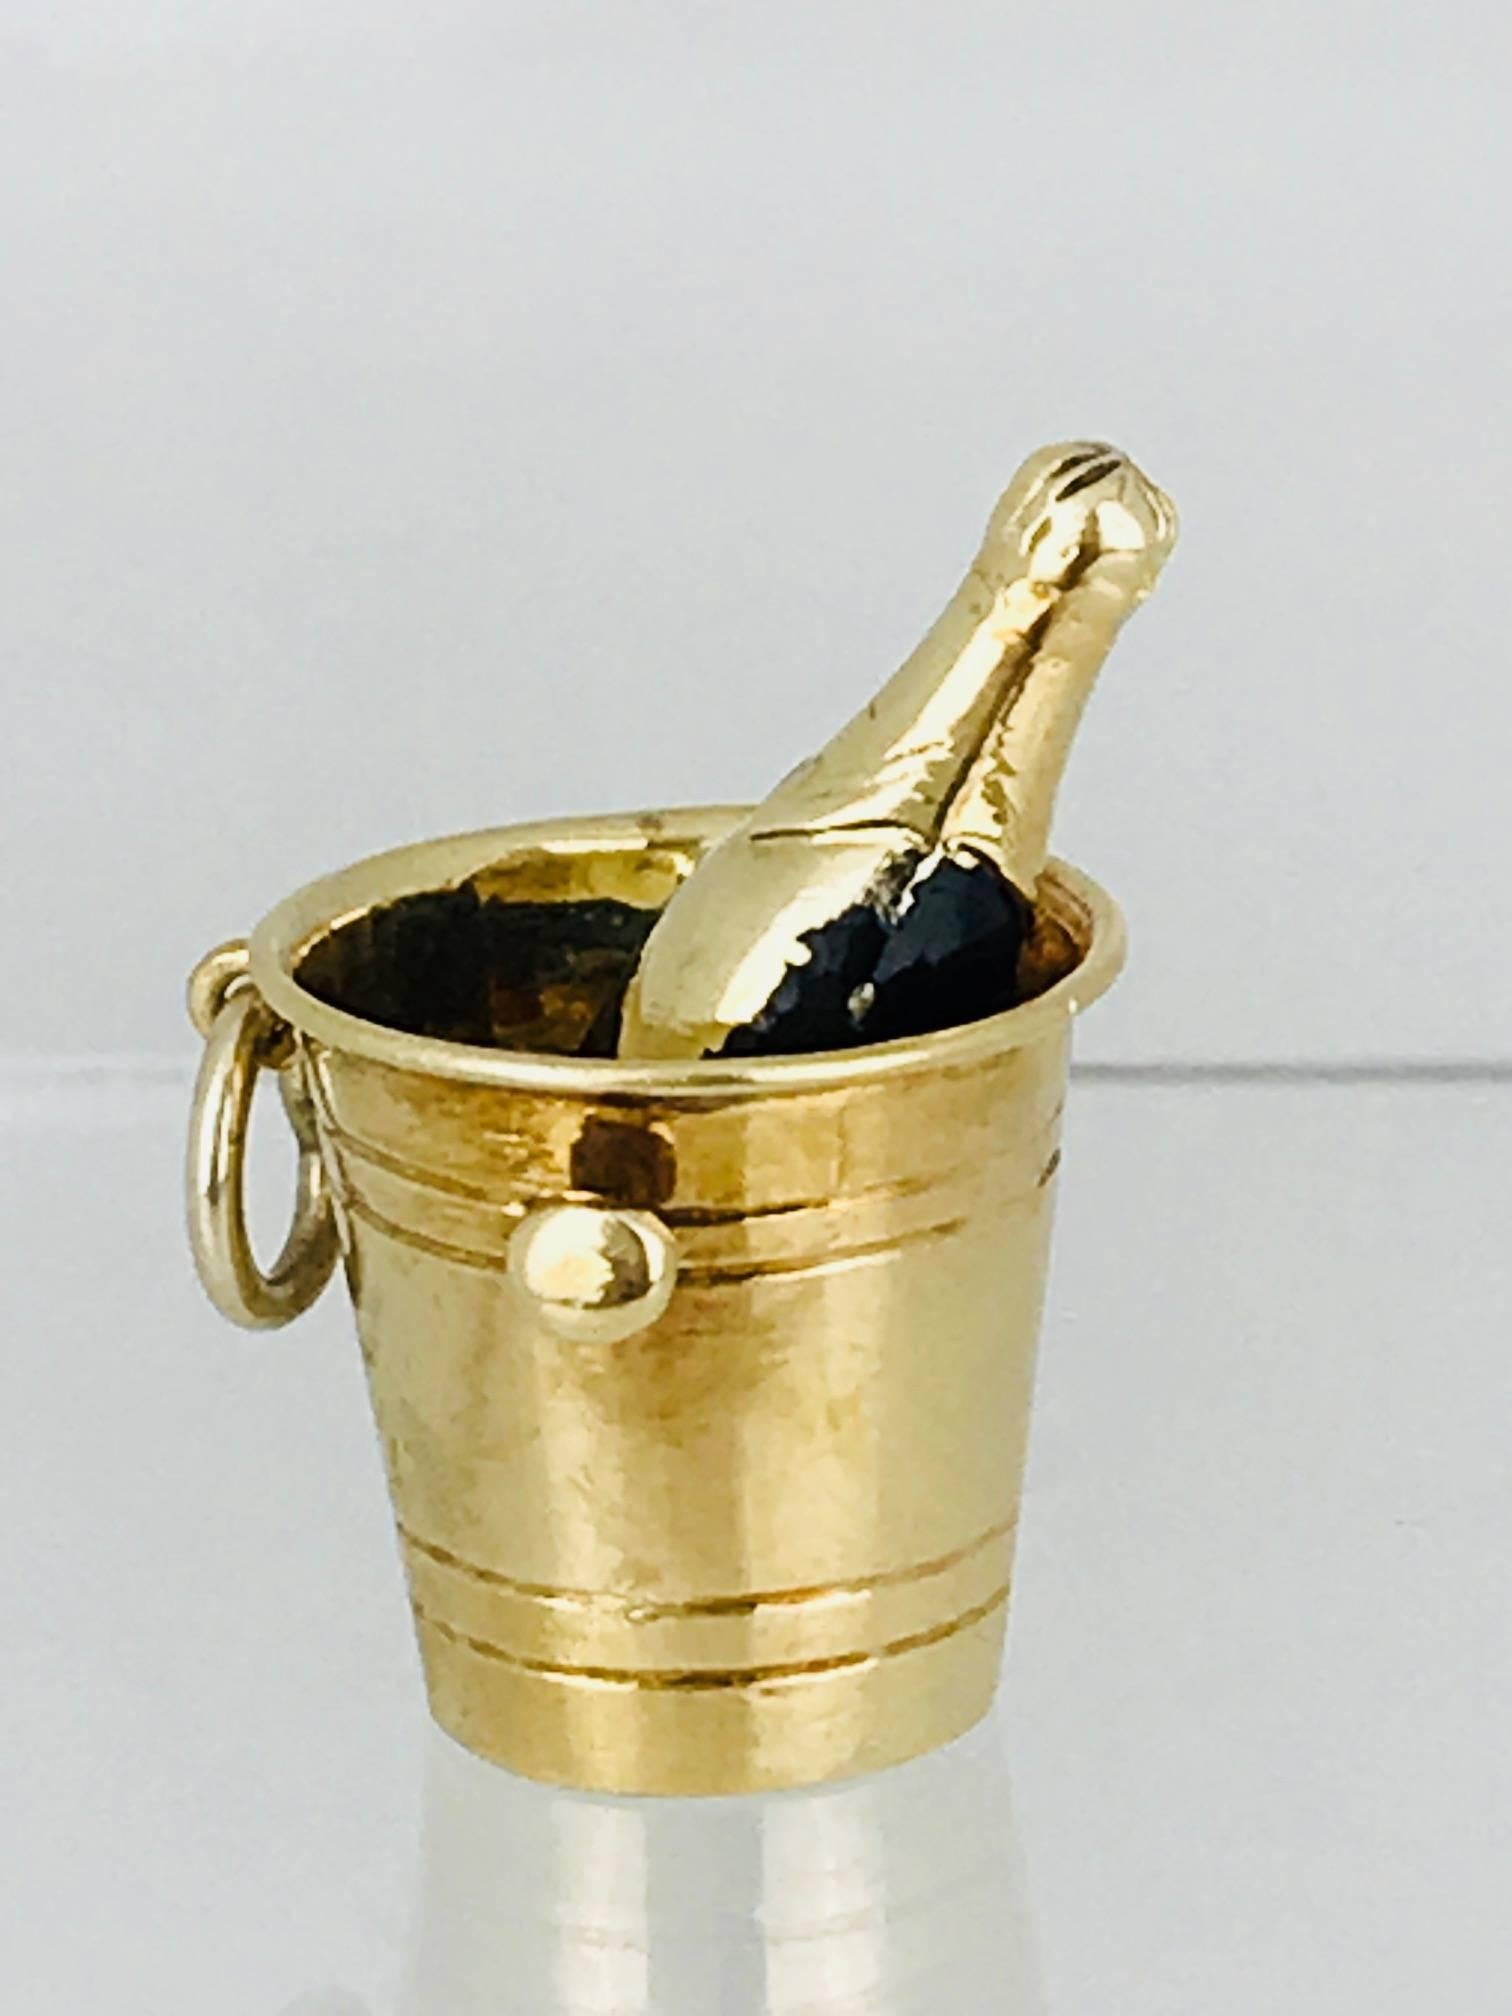 Champagne on Ice Bucket. Champagne bottle shows black enamel and gold made of 14 Karat Yellow Gold.
Circa 1950's
Vintage, unique and rare charm can be used for charm bracelet or necklace

GIA Gemologist, inspected & evaluated